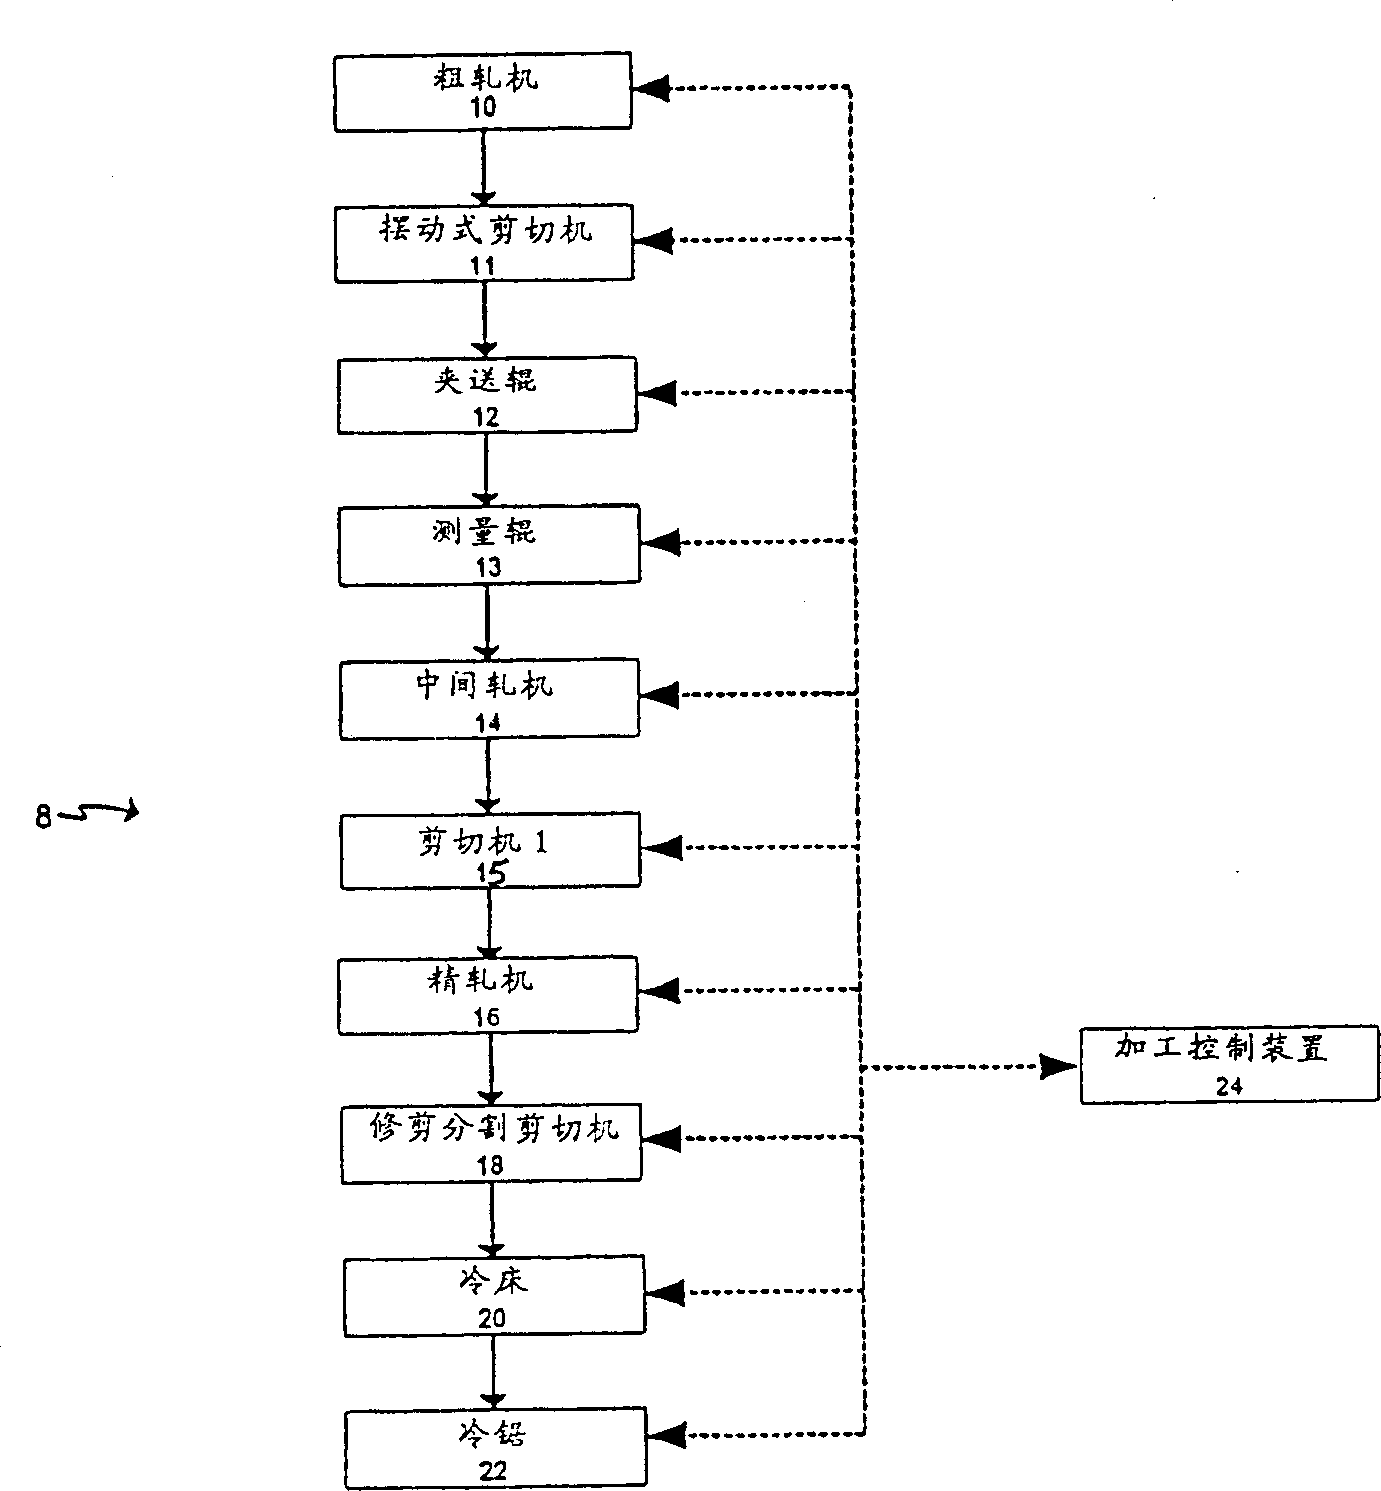 System and method for optimizing cutting of rolling mill